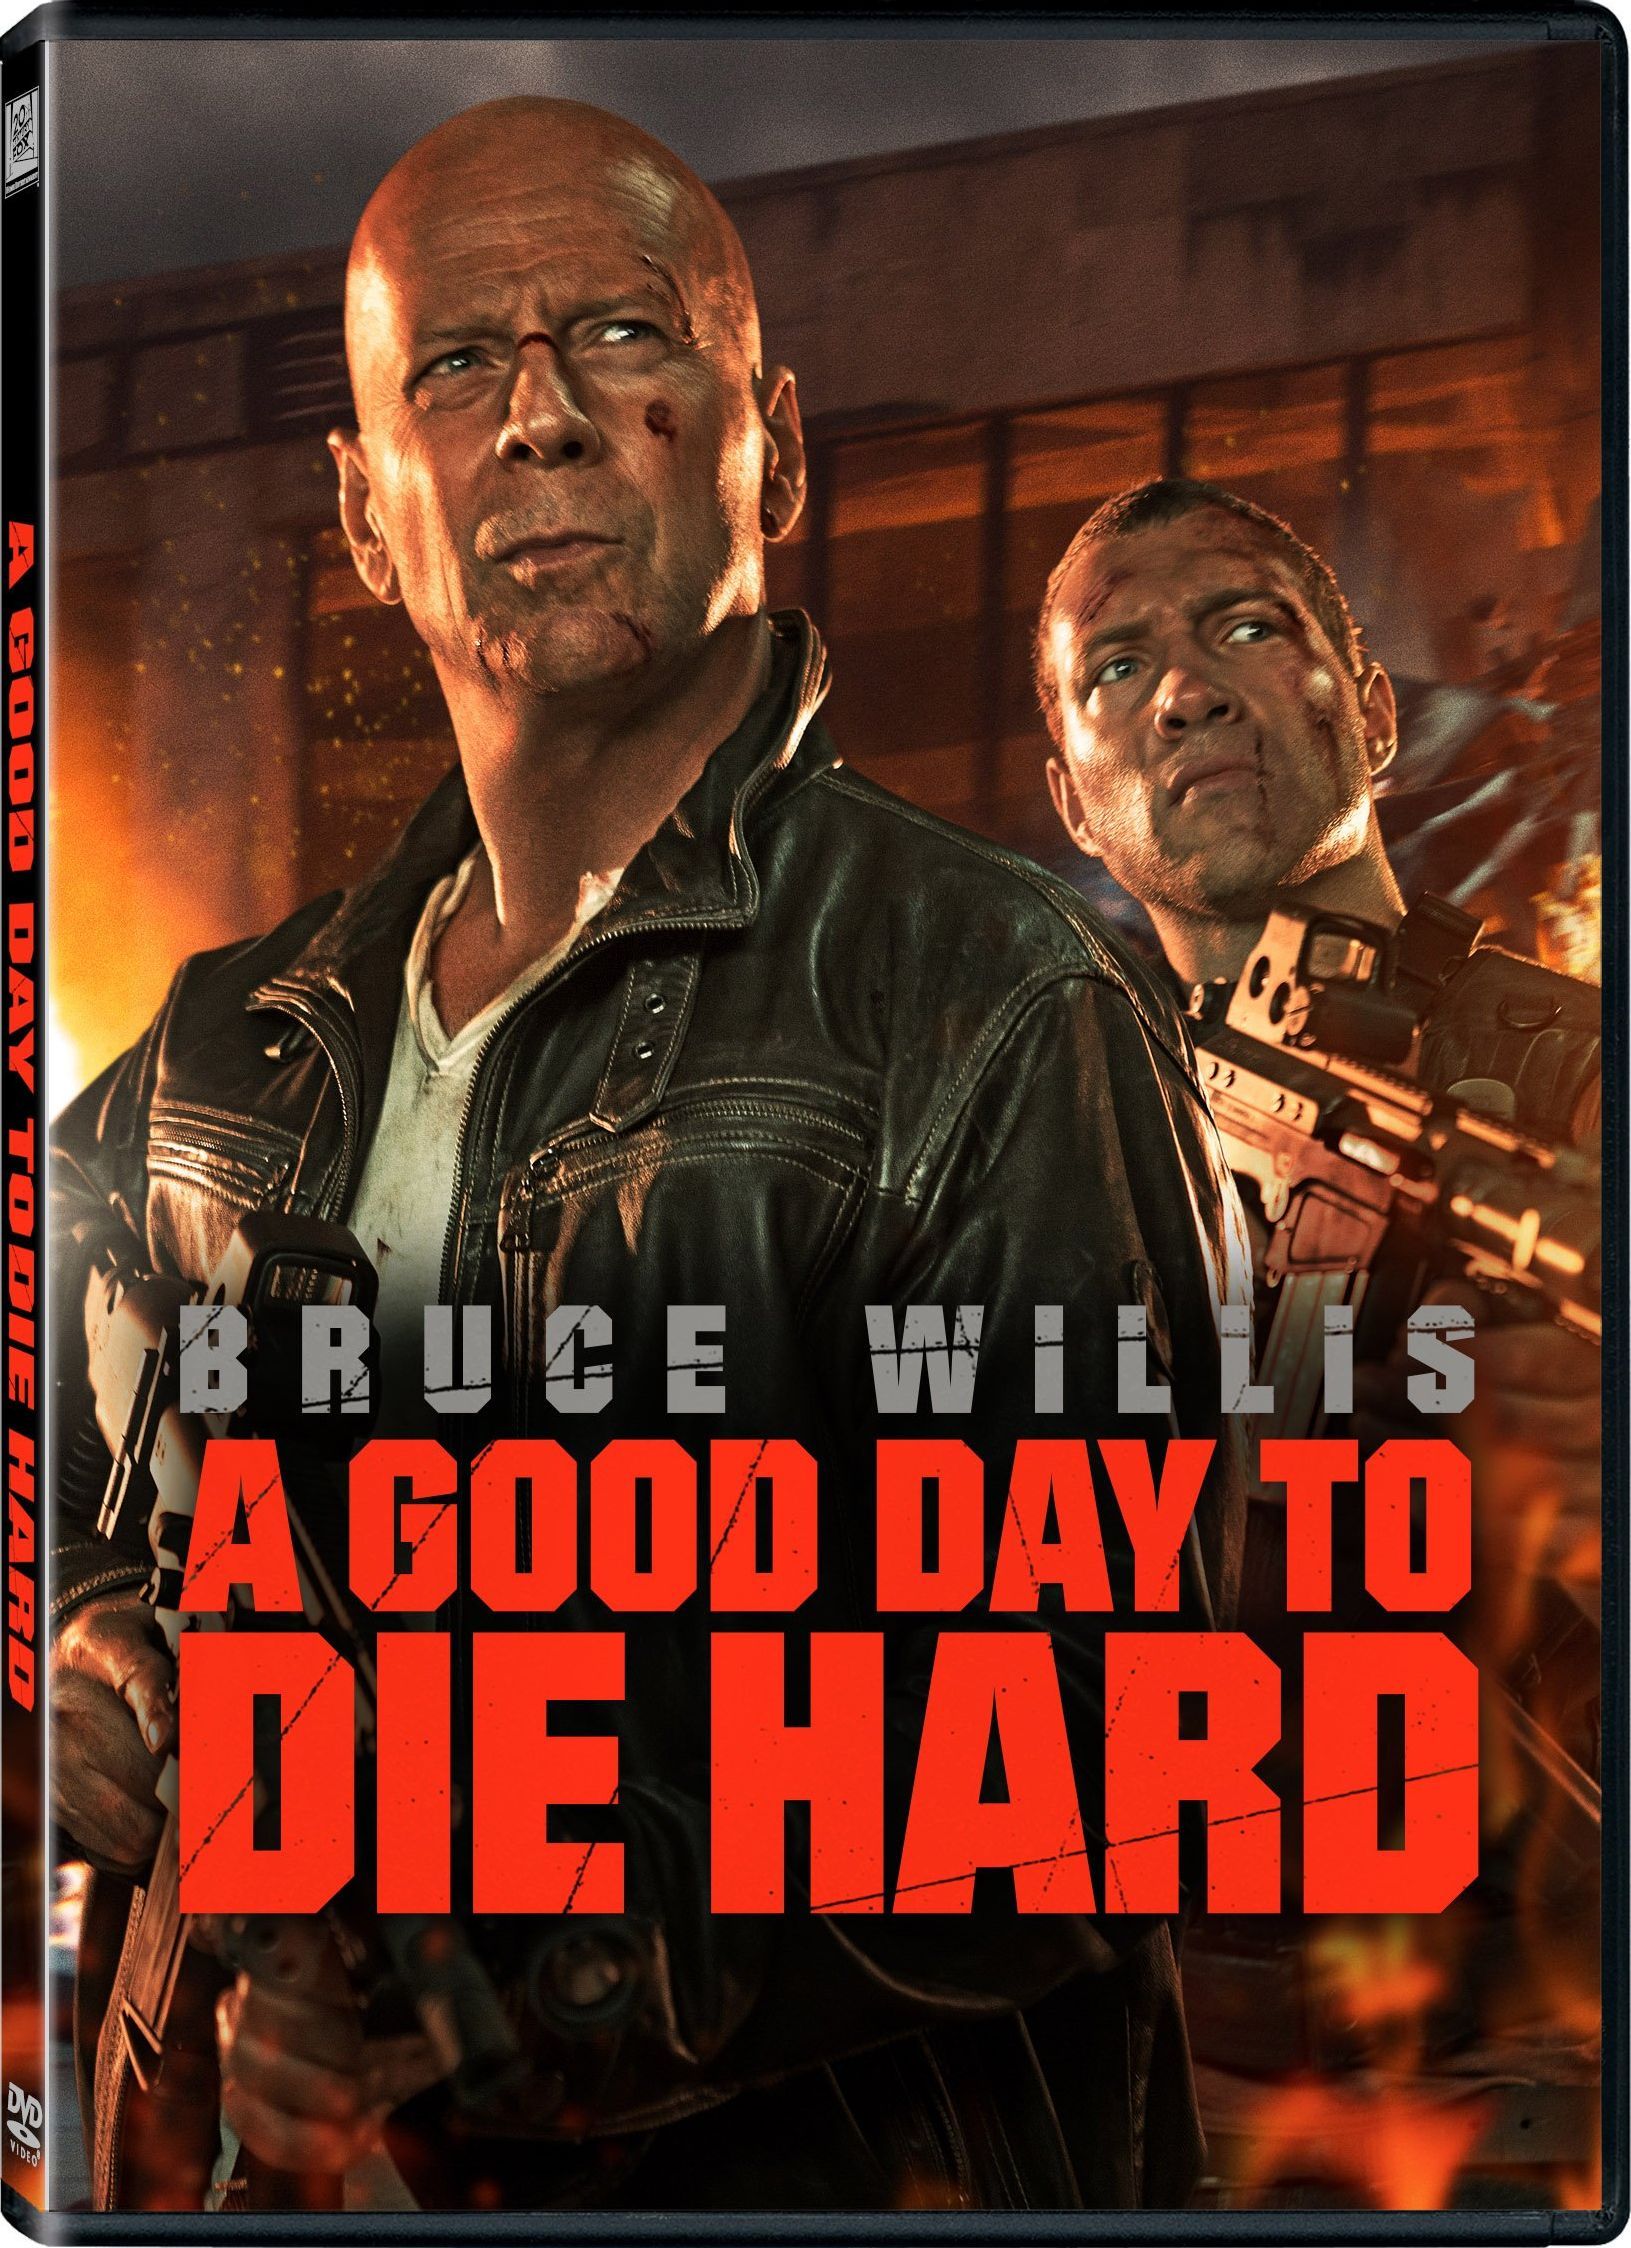 A Good Day To Die Hard wallpaper, Movie, HQ A Good Day To Die Hard pictureK Wallpaper 2019